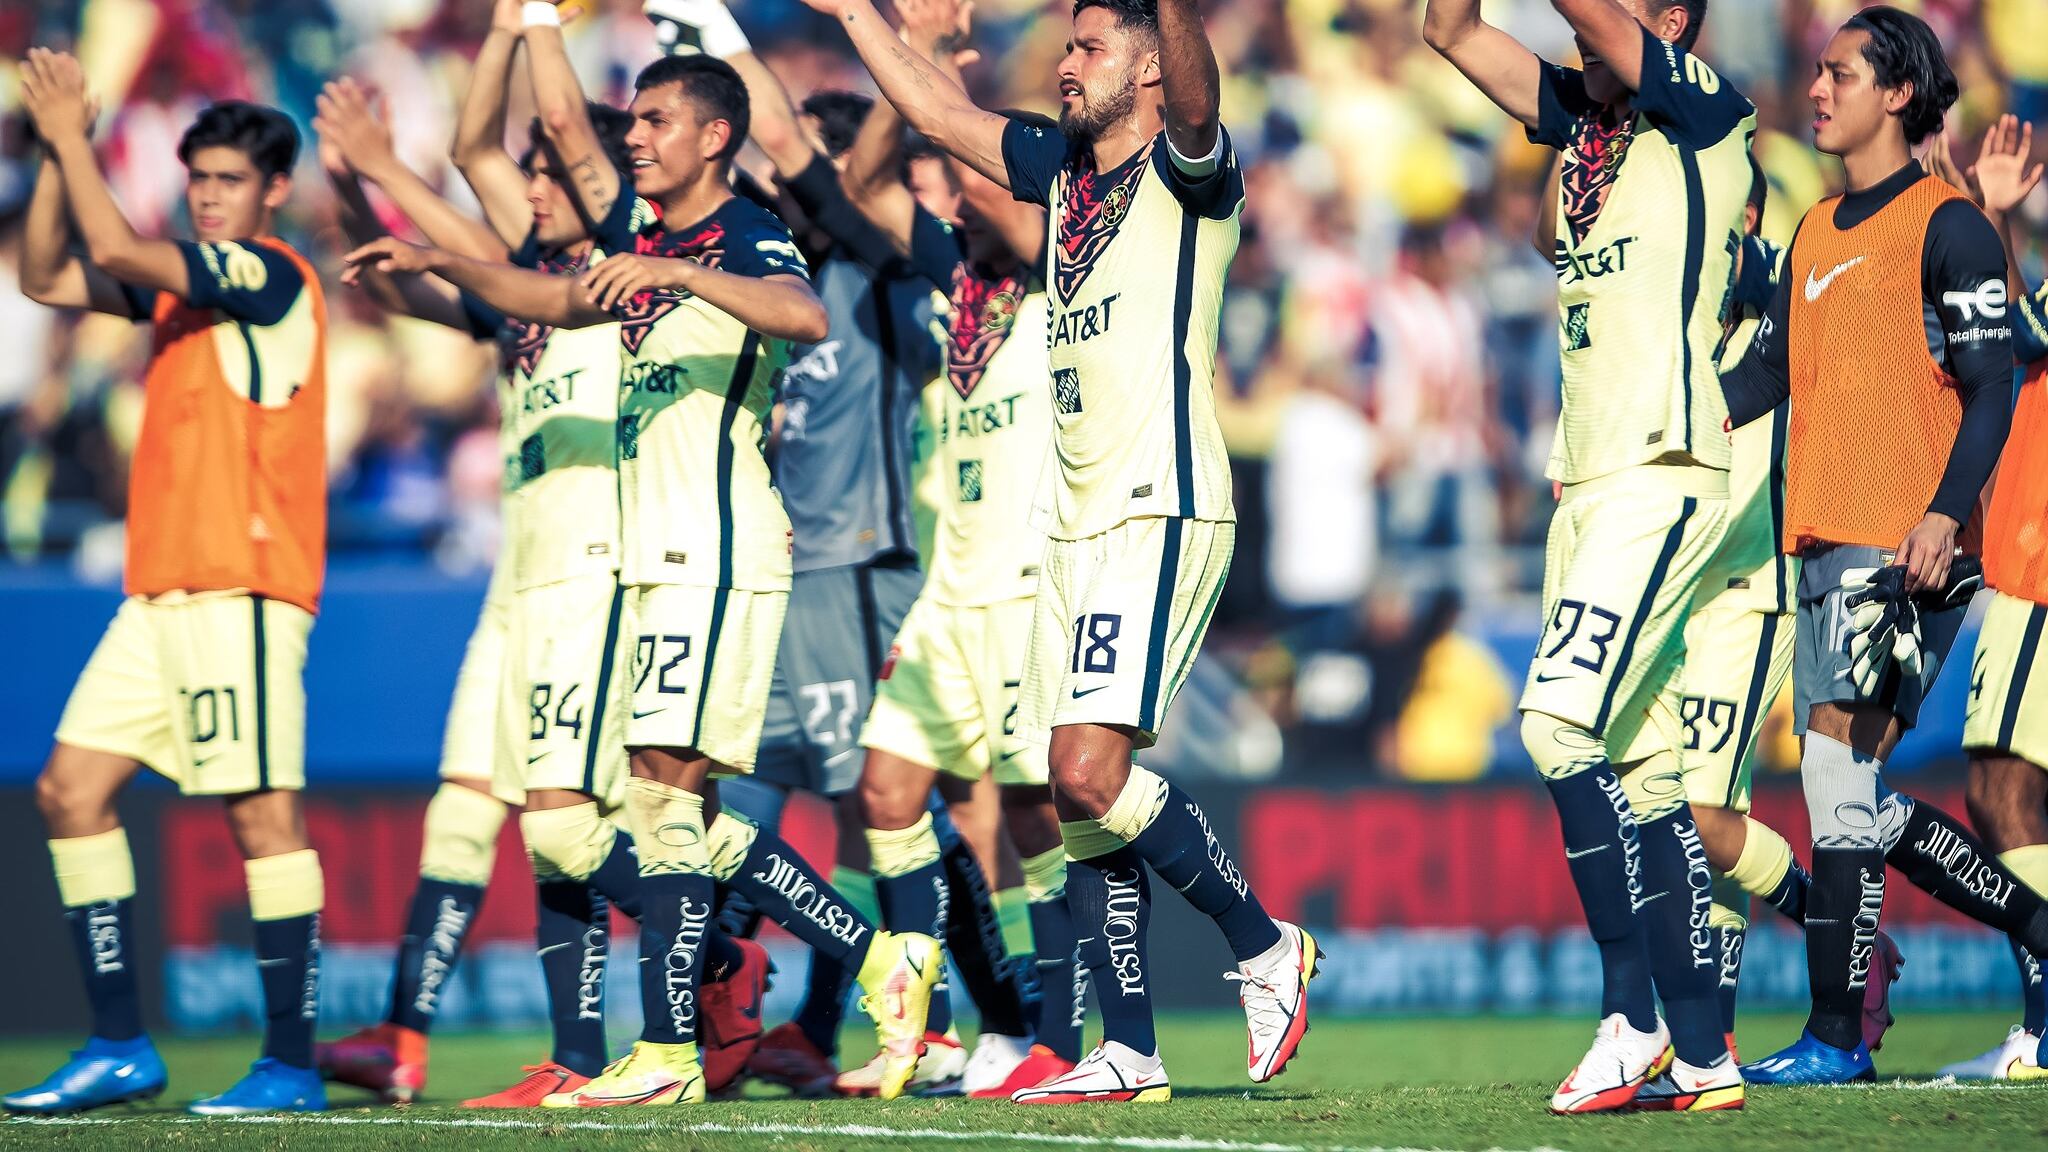 Club América will have their first departure even if they win Liga MX title